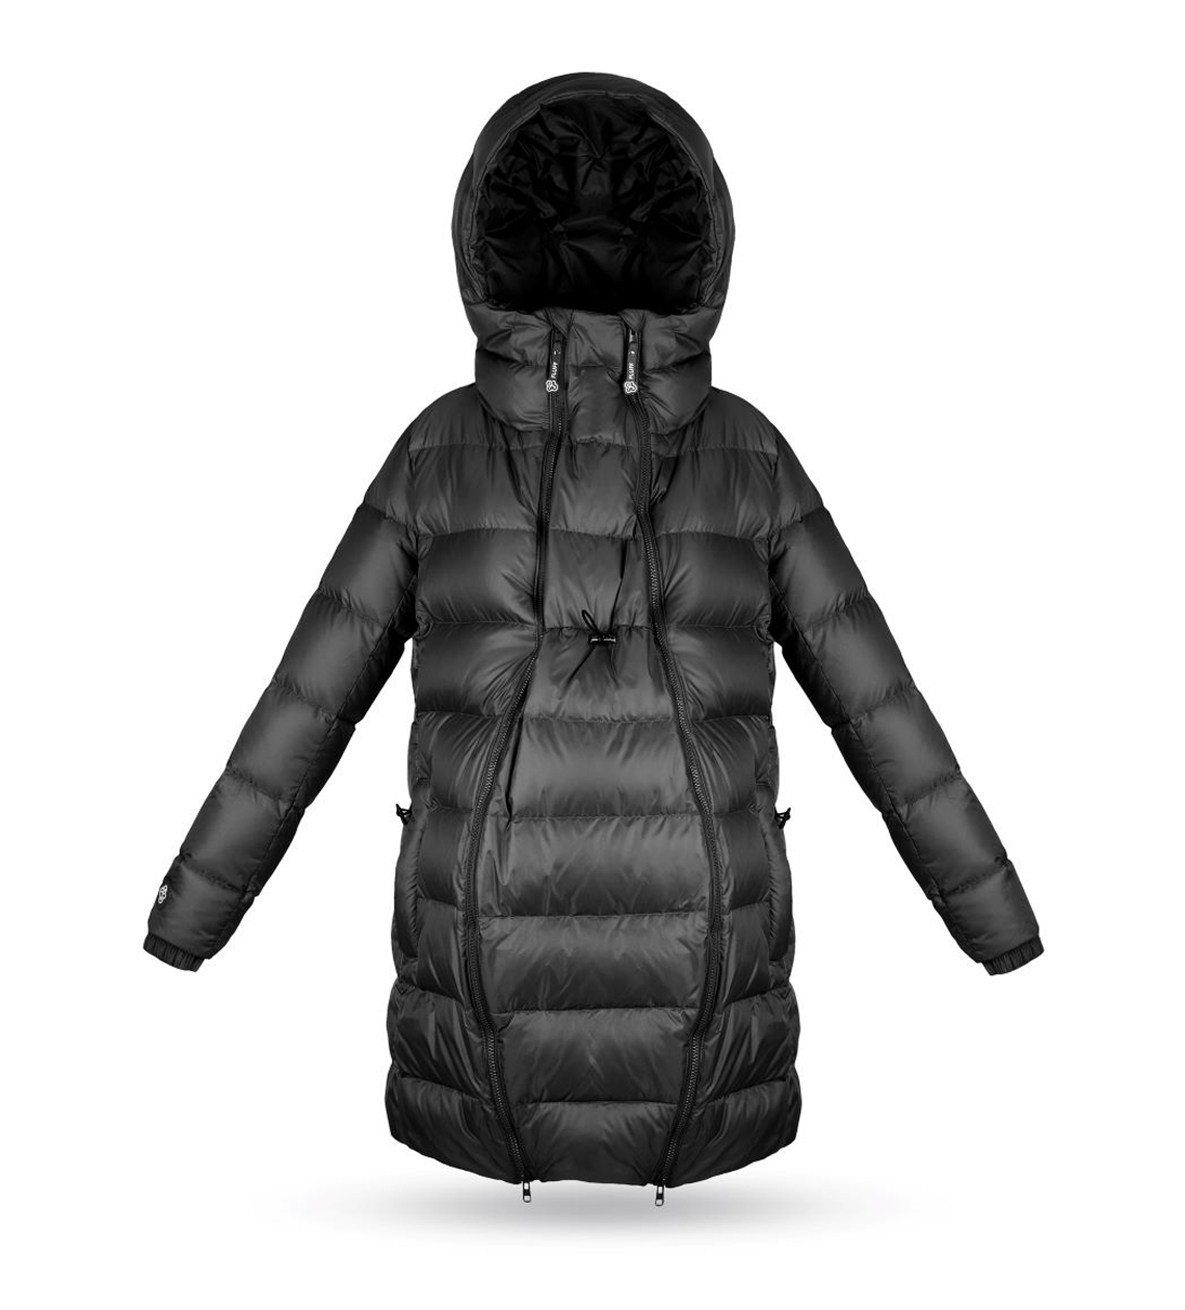 Winter maternity coat with detachable panel for pregnancy and to cover baby carrier. With hood. Natural goose down.